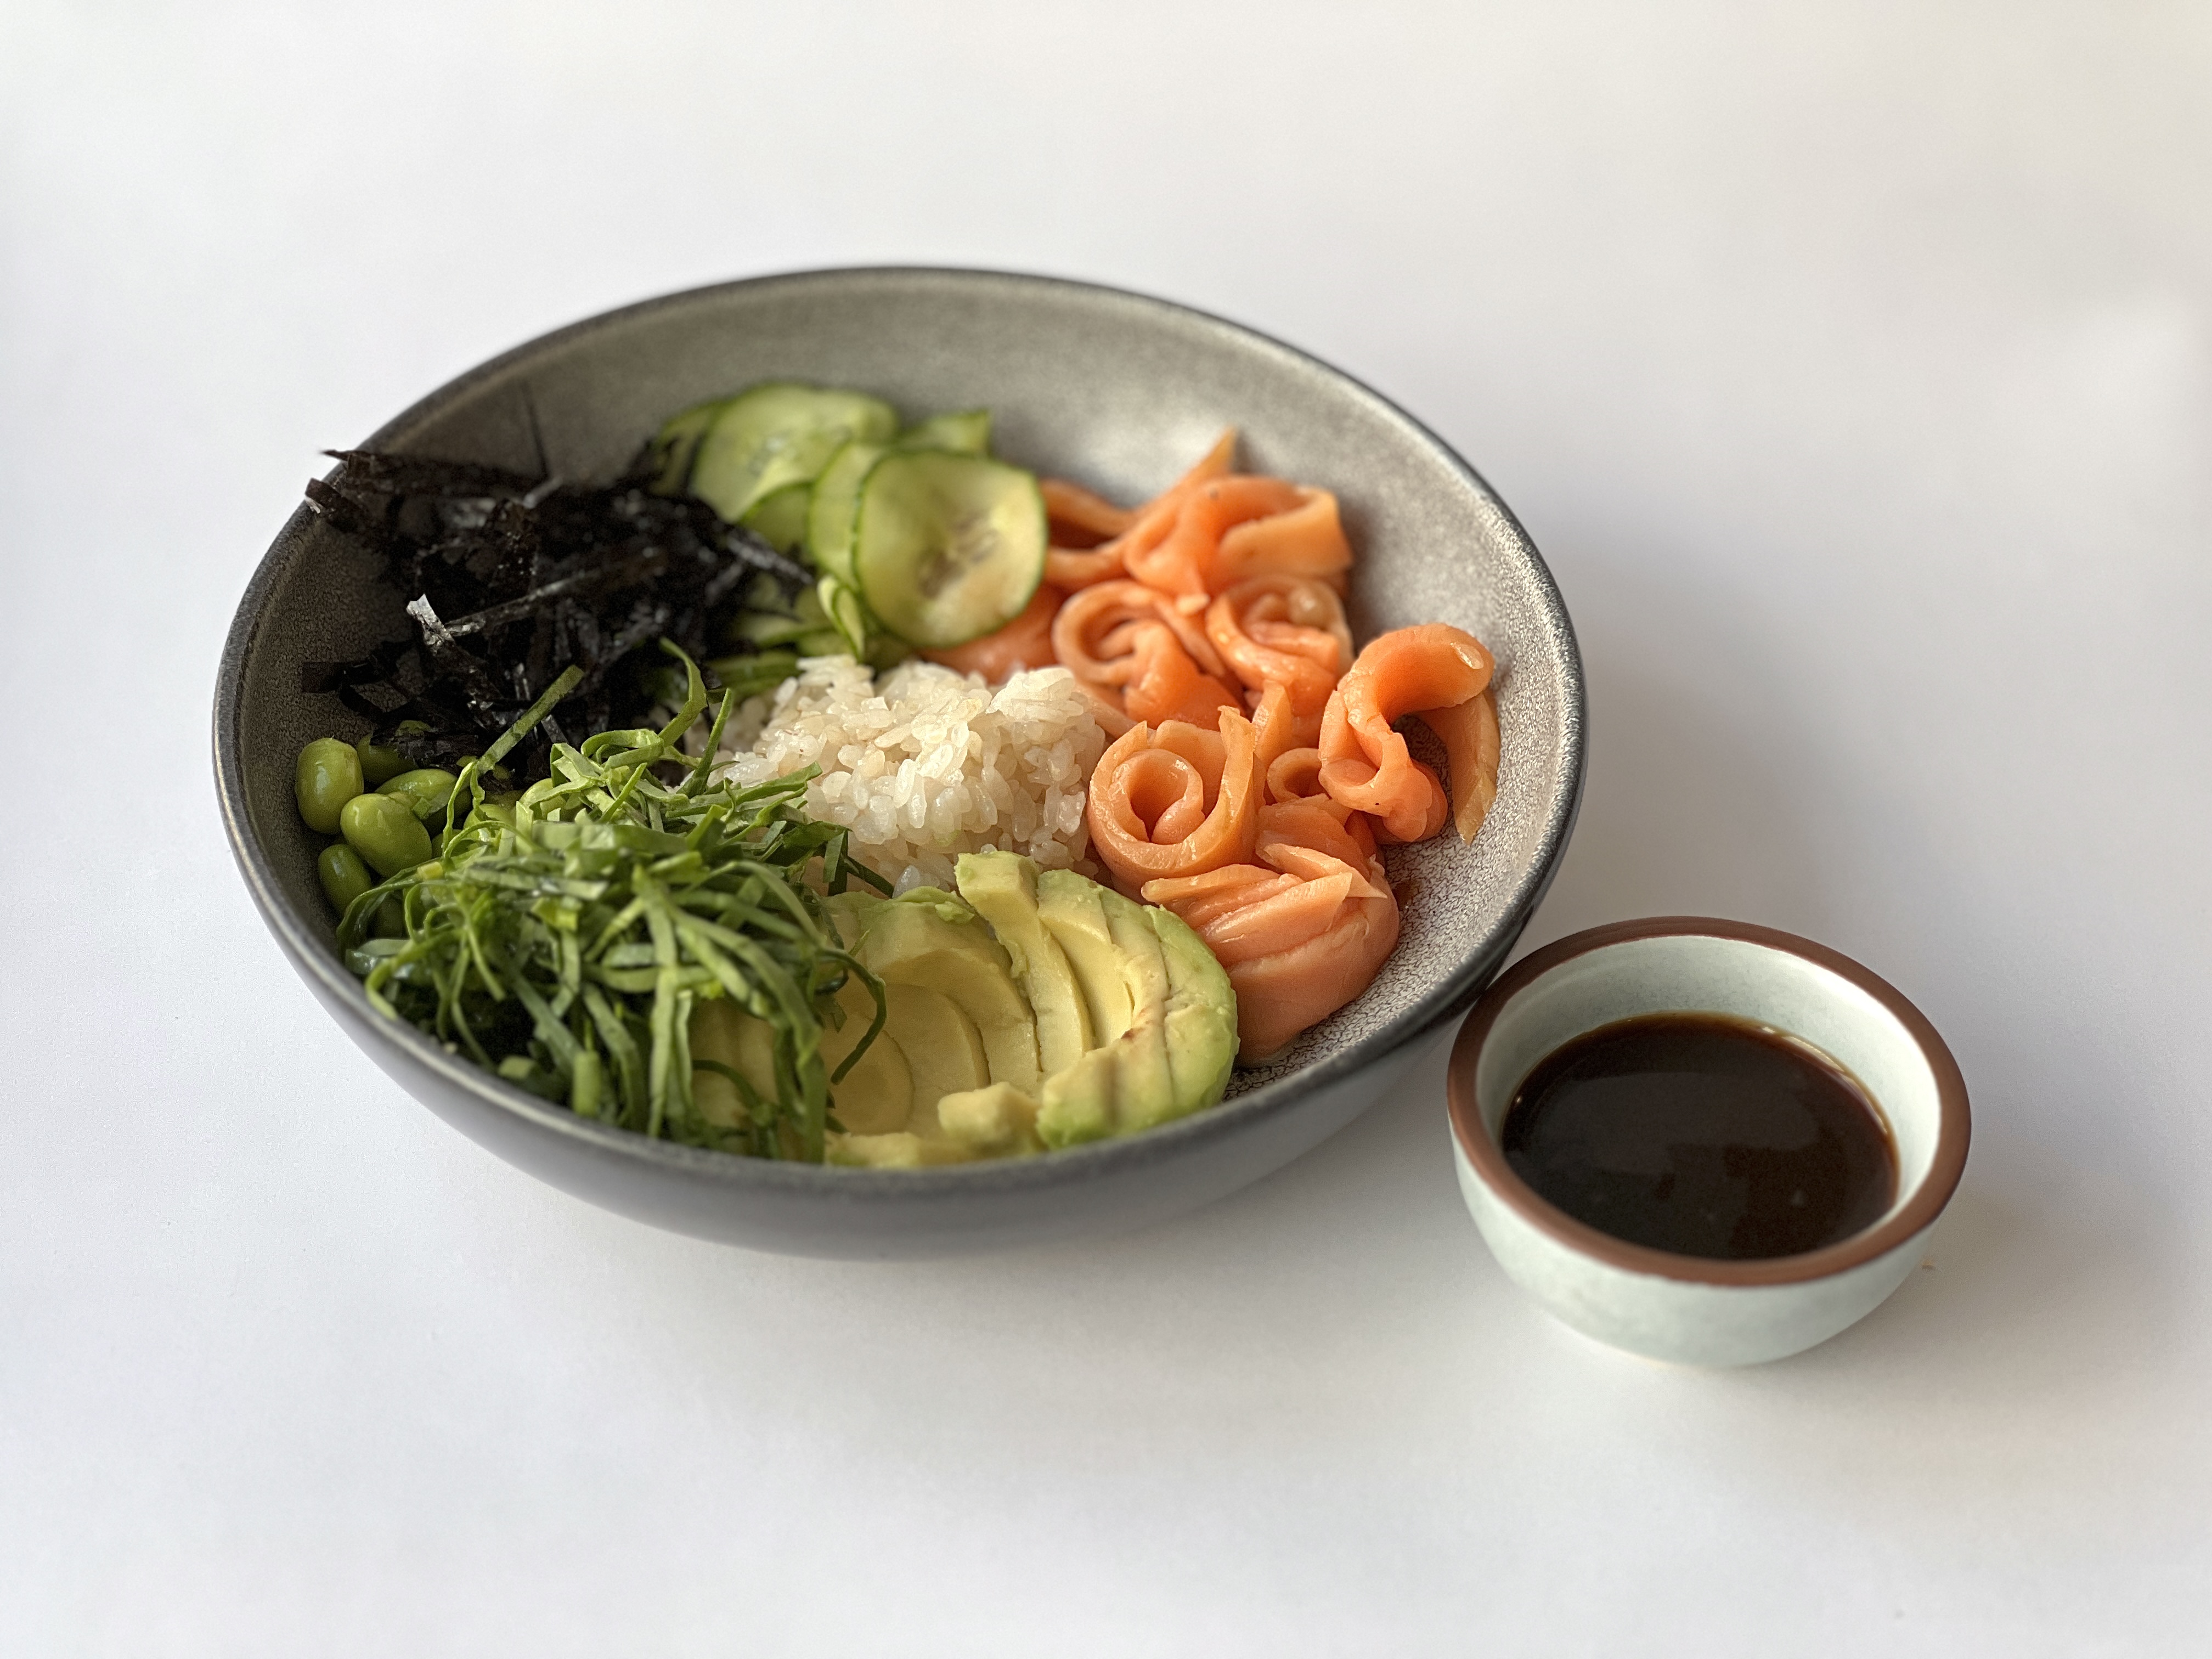 Lightly salted trout, avocado, ginger cucumber, nori,<br>rice, spinach<br><br>